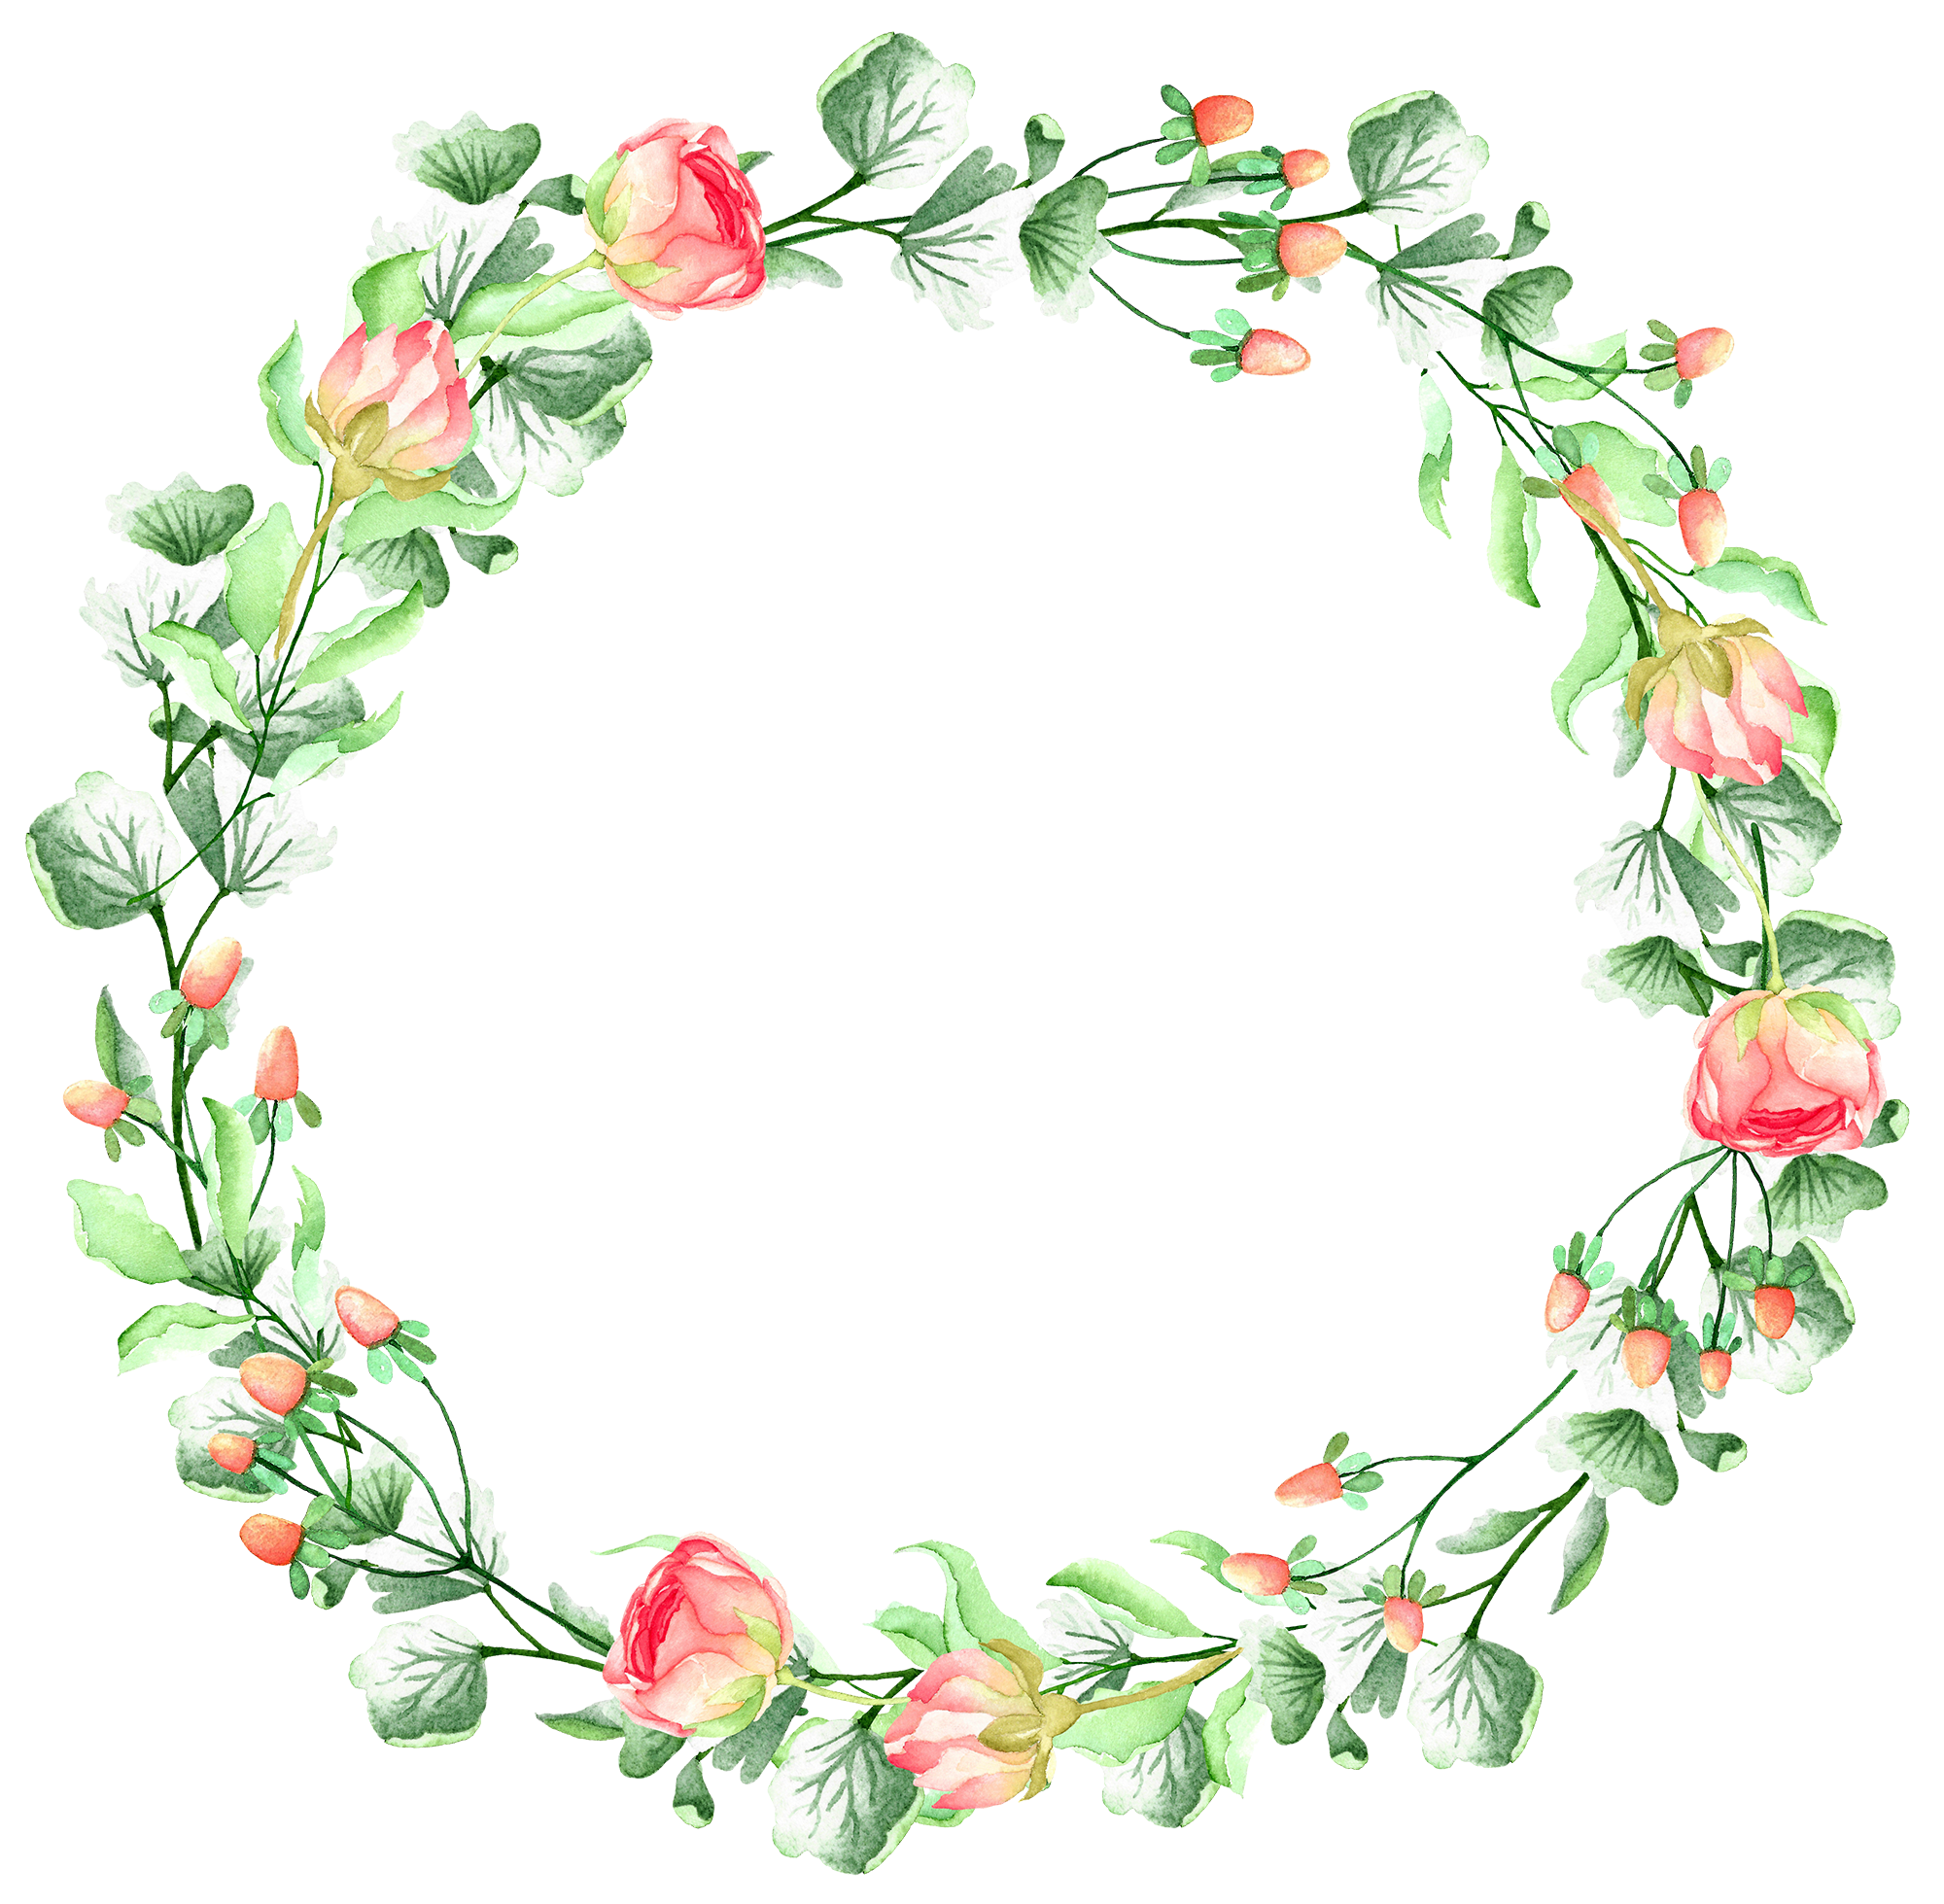 laurel clipart country wreath